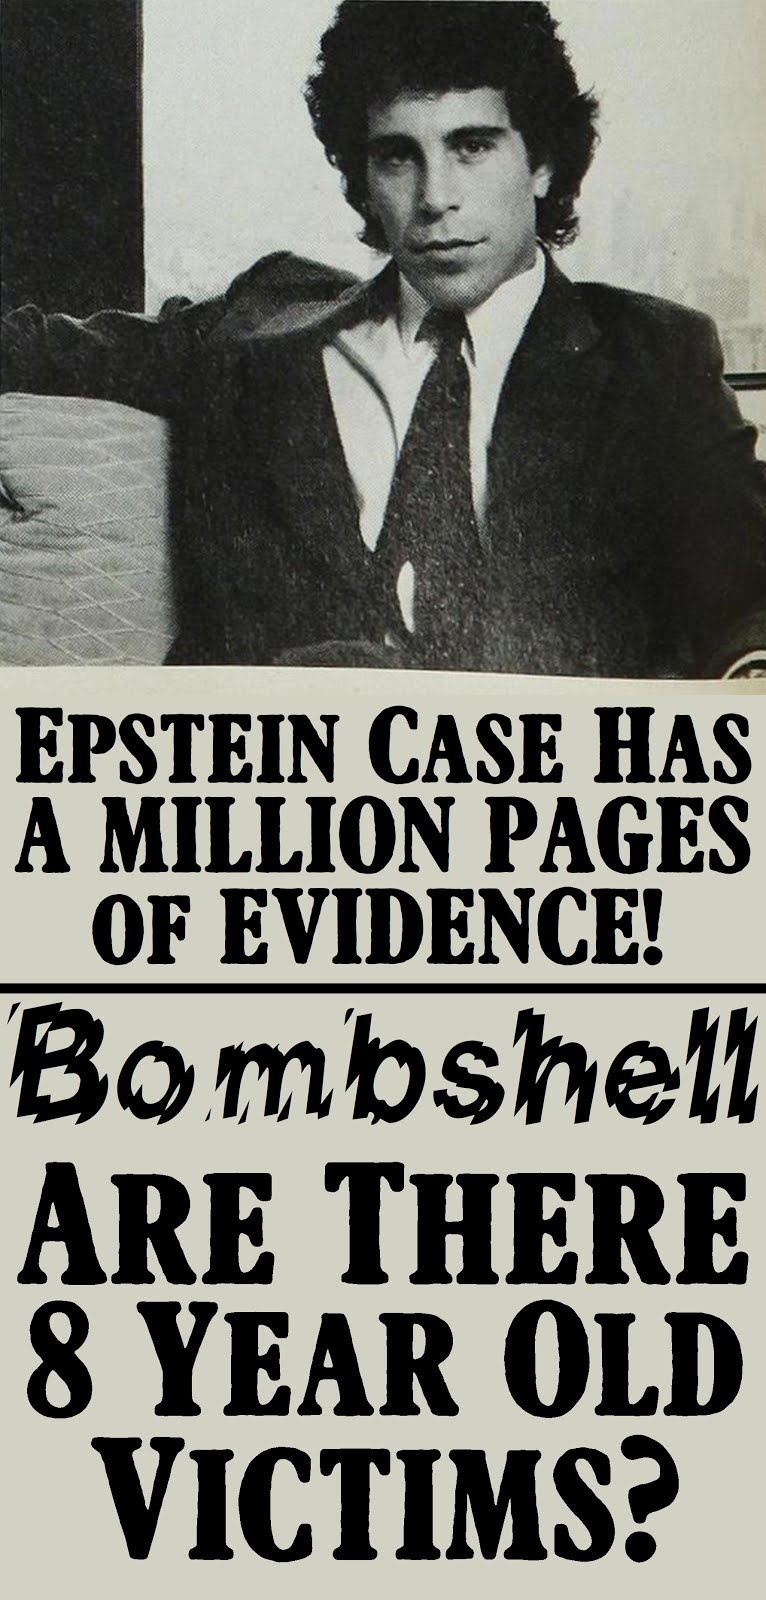 "Epstein Case Has A MILLION PAGES of EVIDENCE!" Says US Lawyers